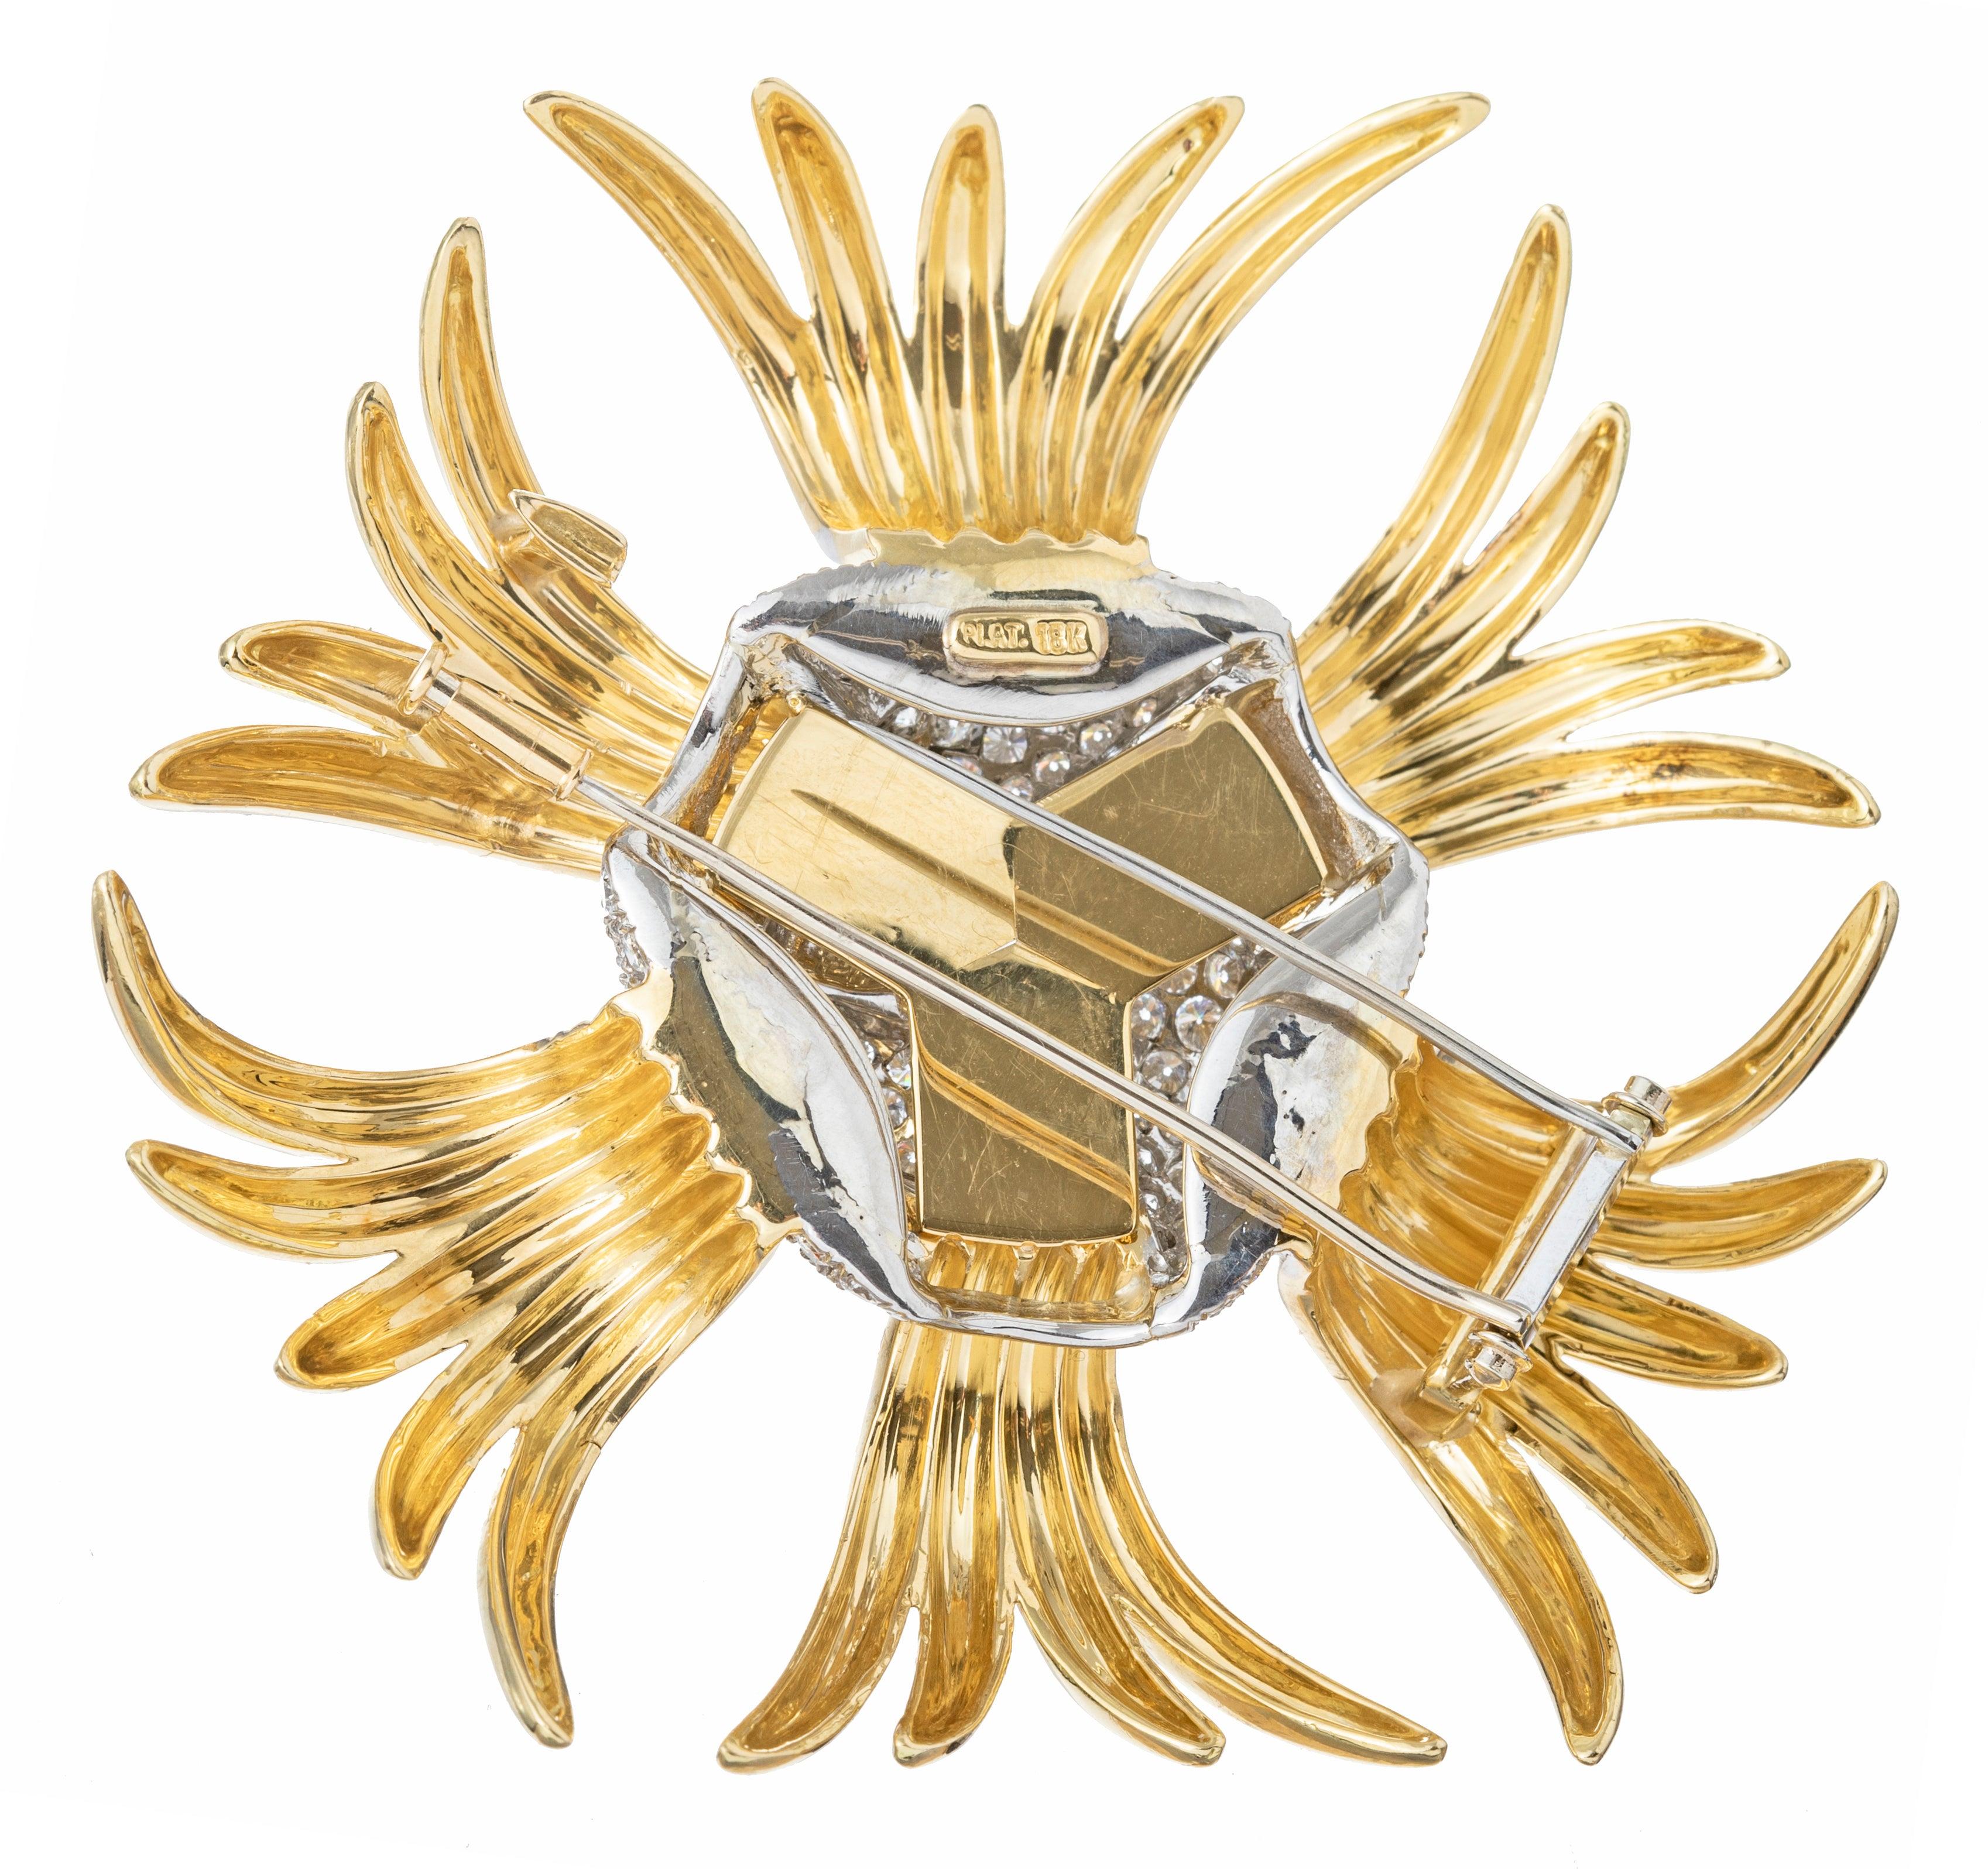 Large spray brooch, featuring high-polished 18k yellow gold radiating from a pave-set diamond knot motif at center in platinum.

120 round brilliant-cut diamonds weighing approximately 6.00 total carats.  Stamped 'PLAT' '18K'.  2.75